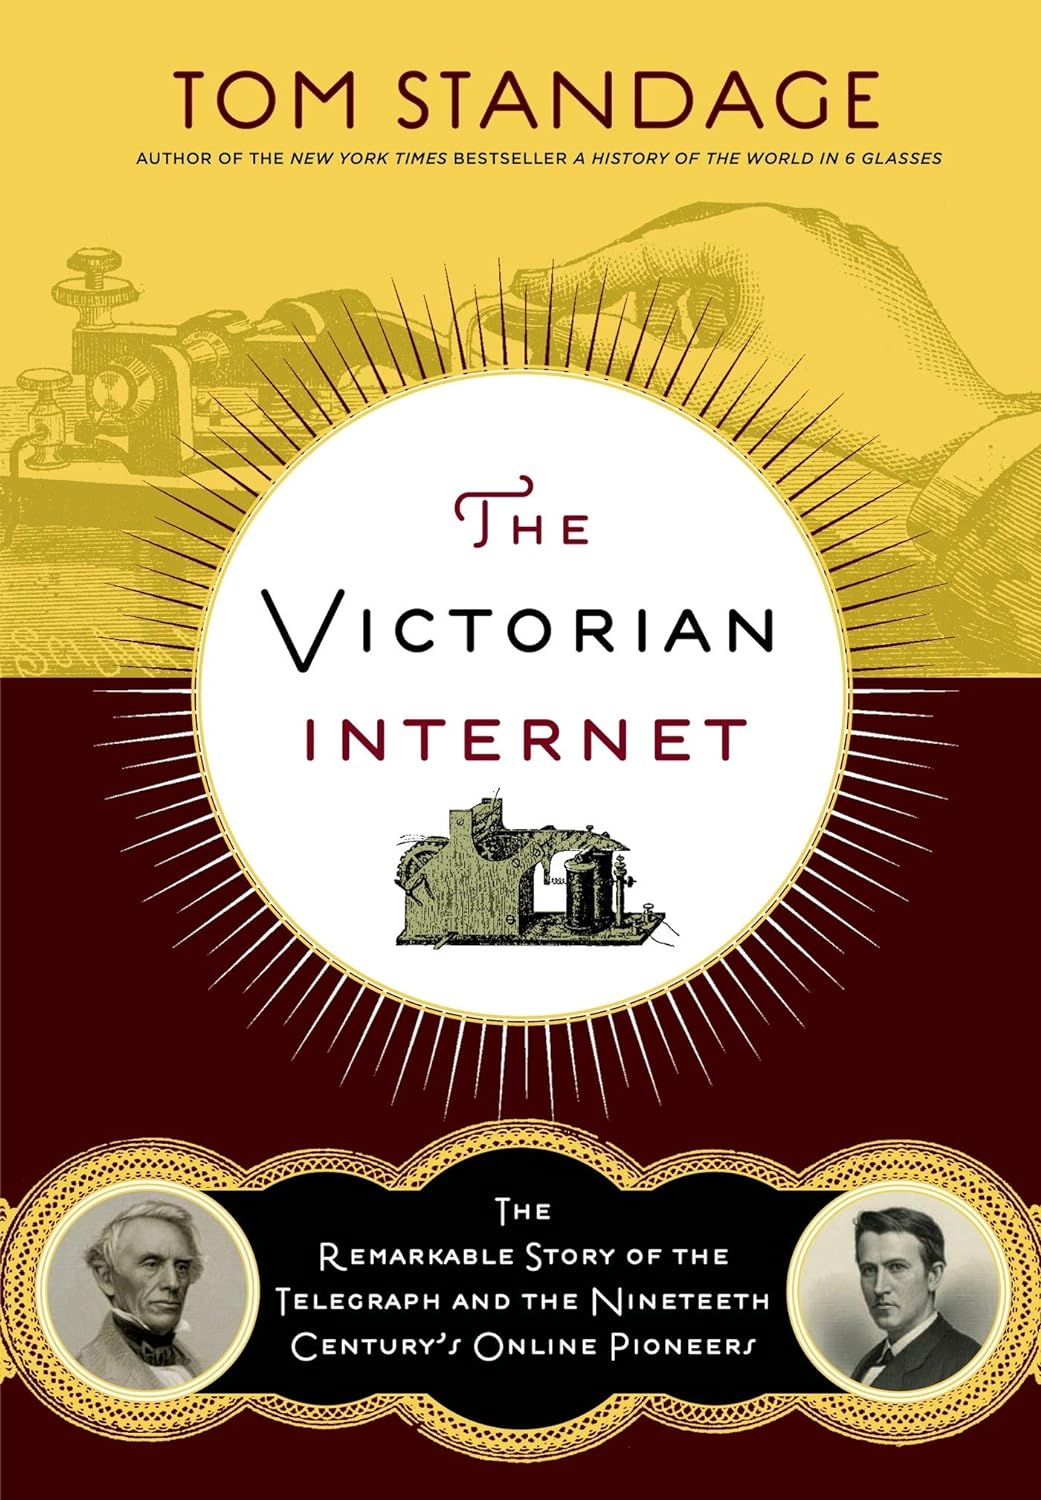 The cover of The Victorian Internet by Tom Standage